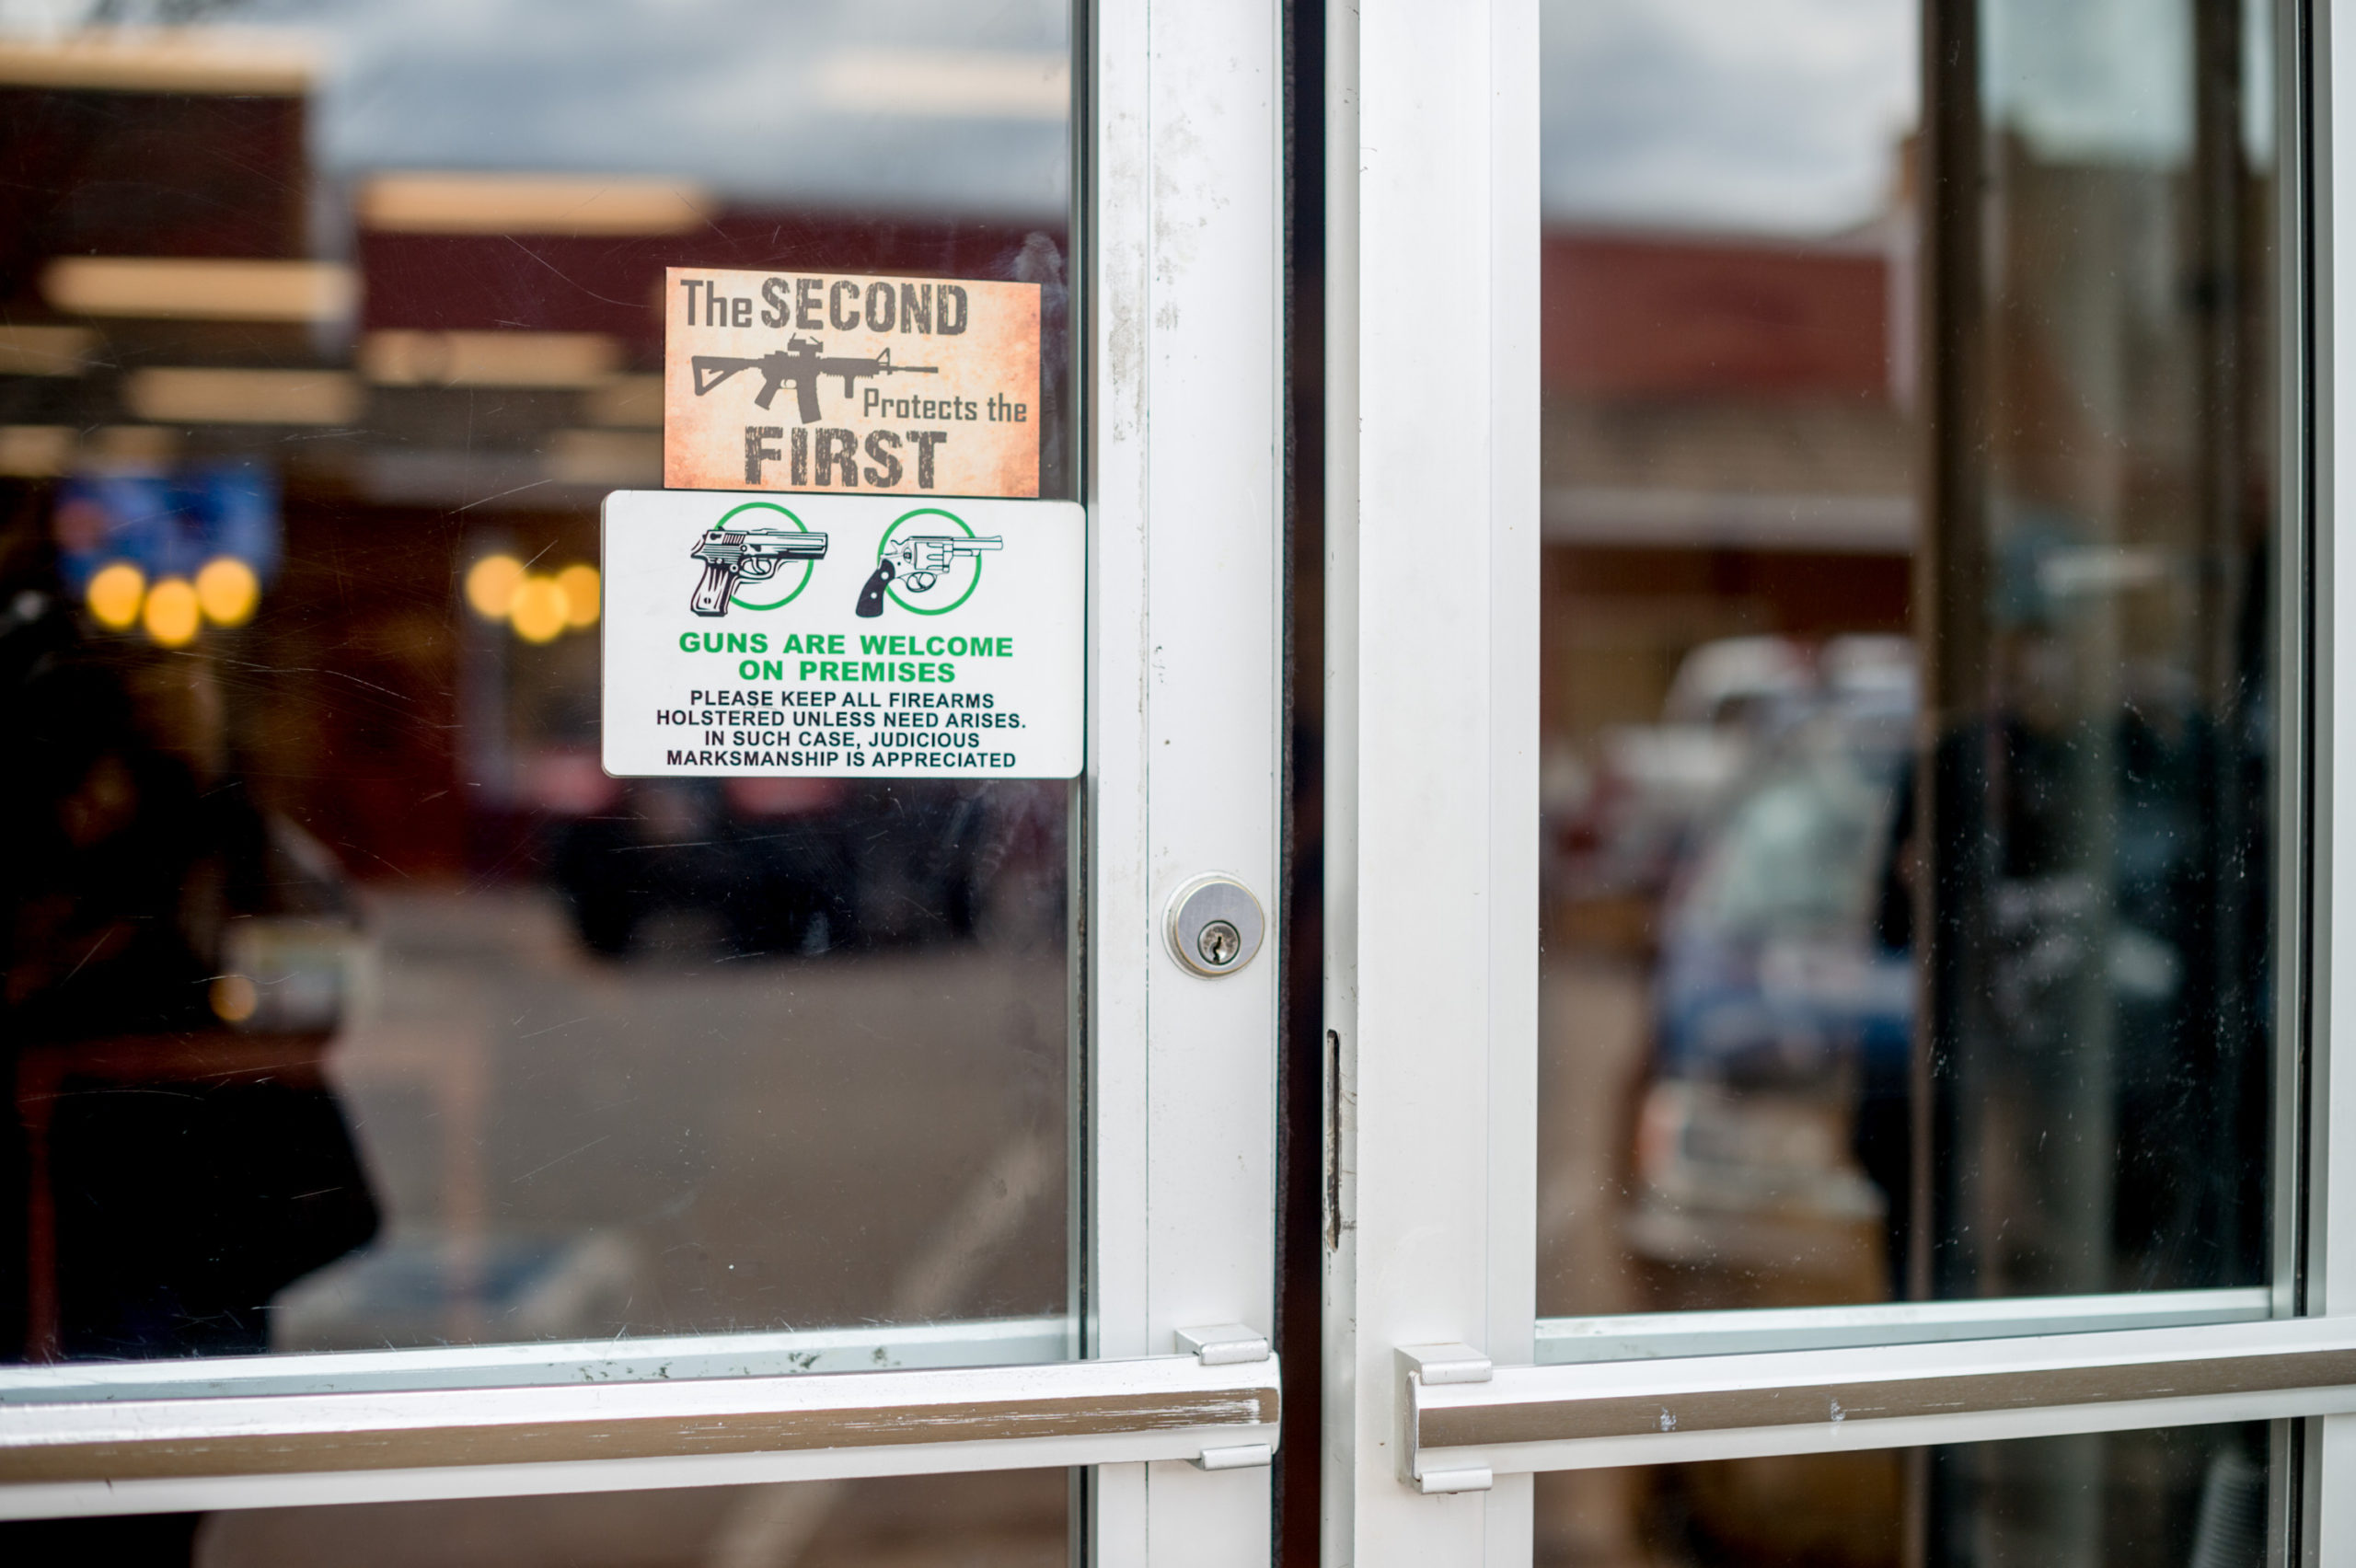 Signs on the door handles at Shooters Grill in Rifle, Colorado on April 24, 2018. - Lauren Boebert opened Shooters Grill in 2013 with her husband Jason in the small town of Rifle, Colorado, the only city in the United States named after a gun according to them. Shortly after Boebert opened the restaurant, there was a murder in the alley behind it. Boebert went next door to the Tradesmen Gun Store and Pawnshop to speak to the owner, Edward Wilks. Wilks explained to her that you dont need a permit in the state of Colorado to open carry. The next day she started carrying a gun with her. The majority of her staff carries, while it is not a requirement to work there she encourages them to do so if they feel comfortable with it. Customers are also welcome to carry firearms on them as well. The restaurants theme remained heavily country western but revolves alot around the theme of the Second Amendment as well. (Photo by EMILY KASK / AFP) (Photo credit should read EMILY KASK/AFP via Getty Images)